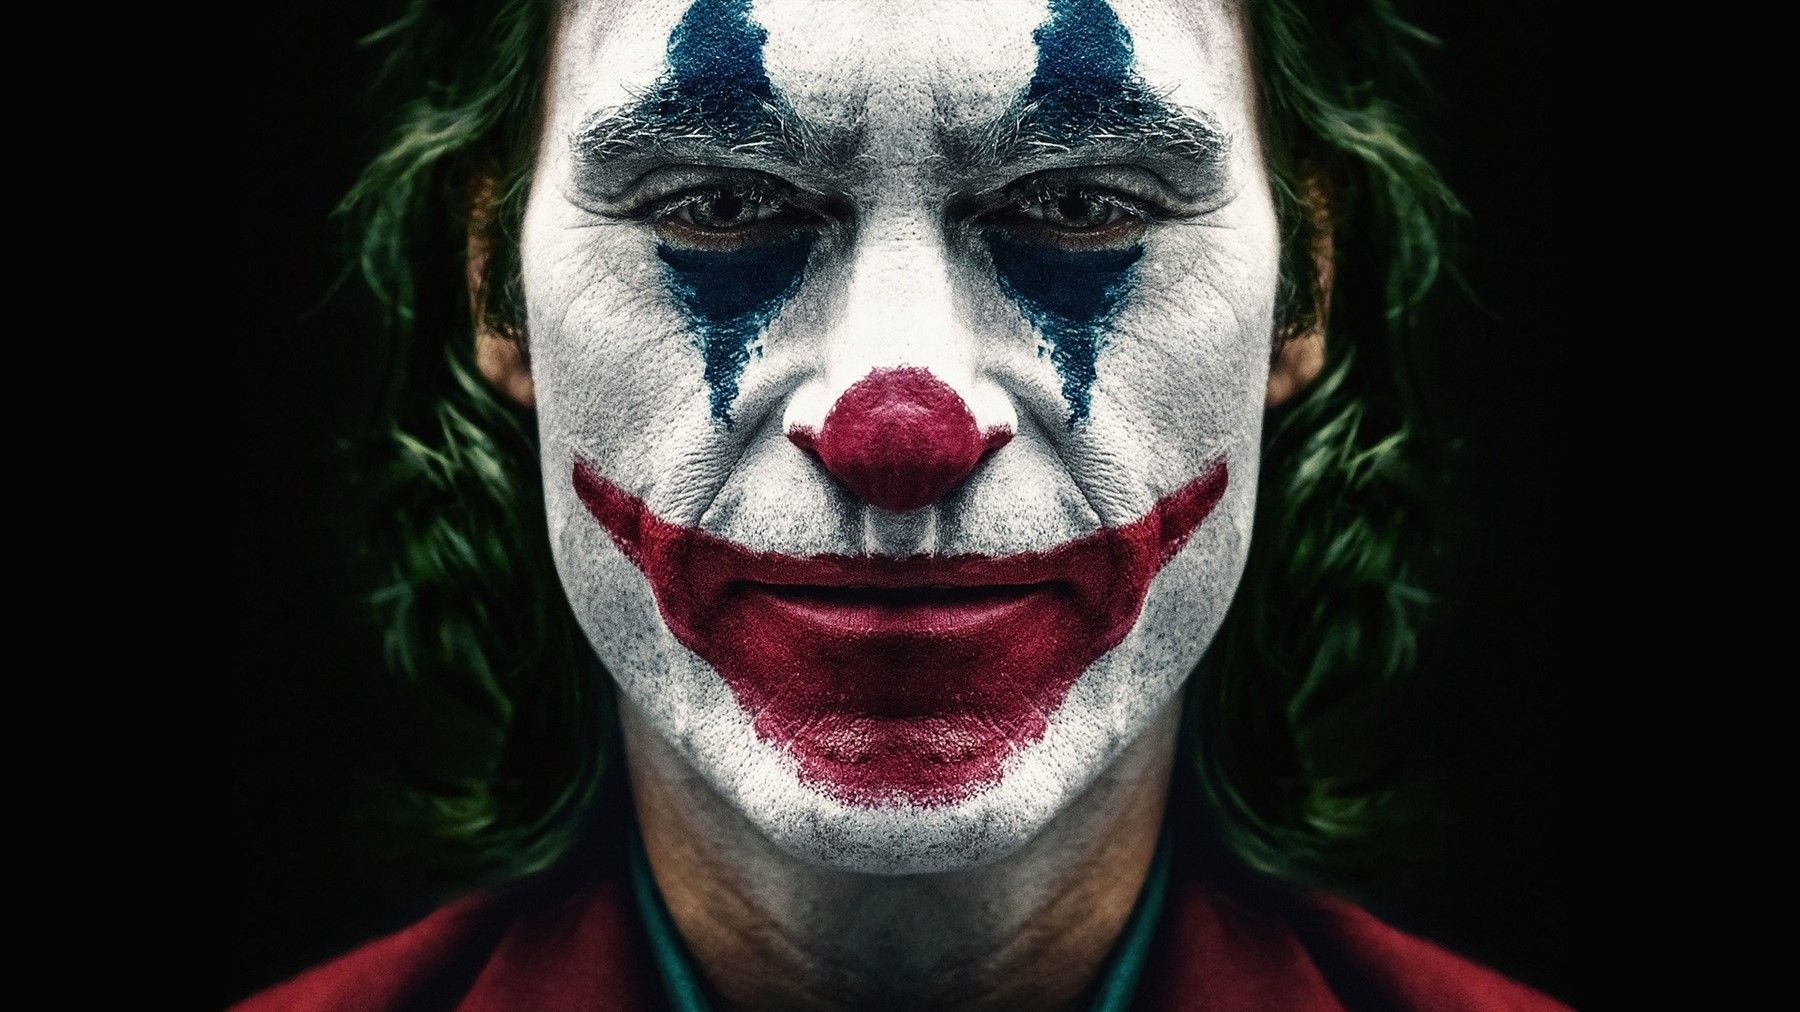 Read and download the Joker screenplay